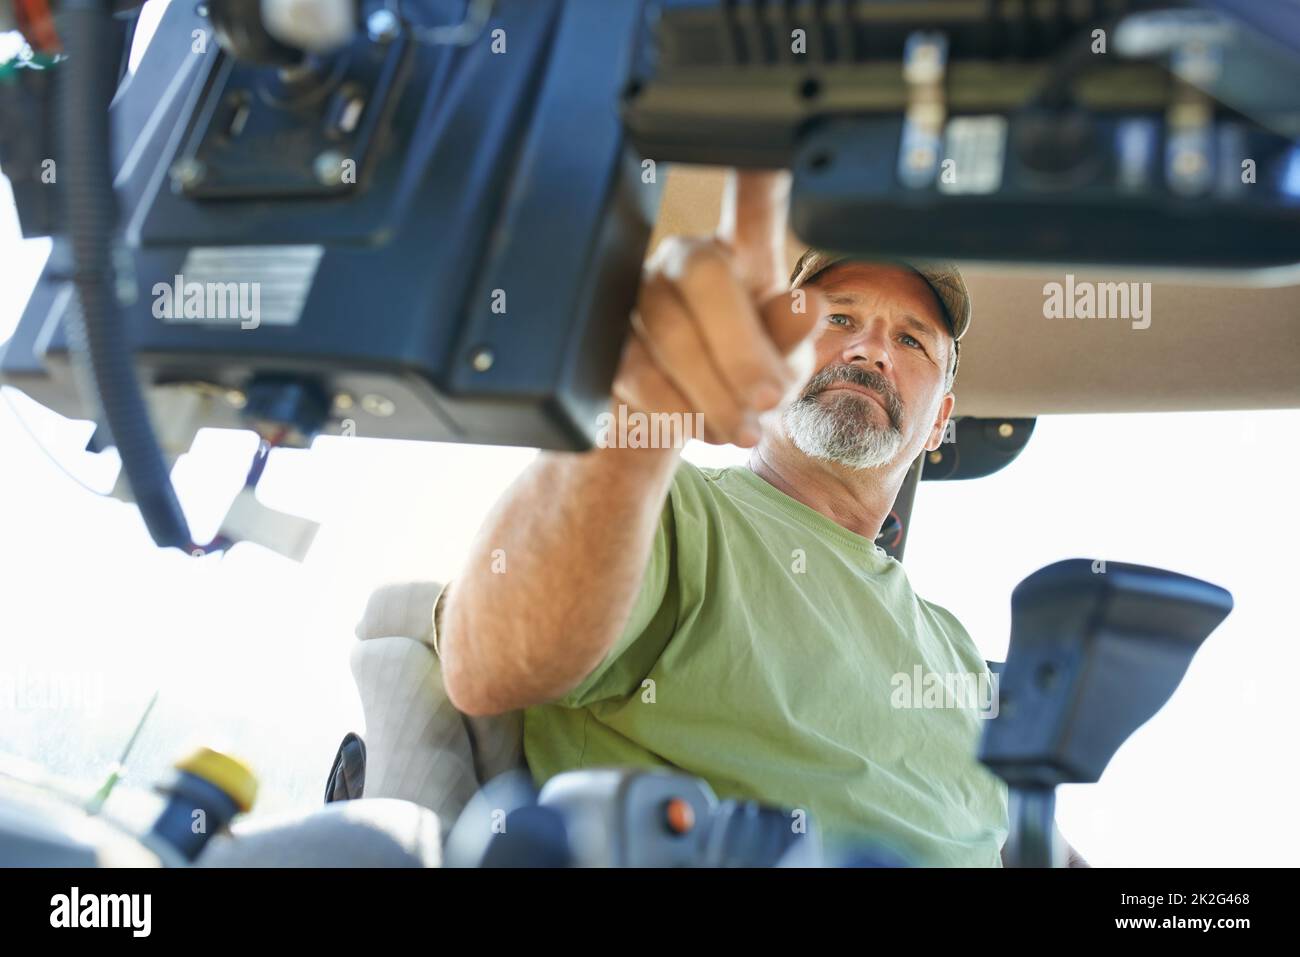 The beginning of the farming day. Shot of a farmer working inside the cab of a modern tractor. Stock Photo